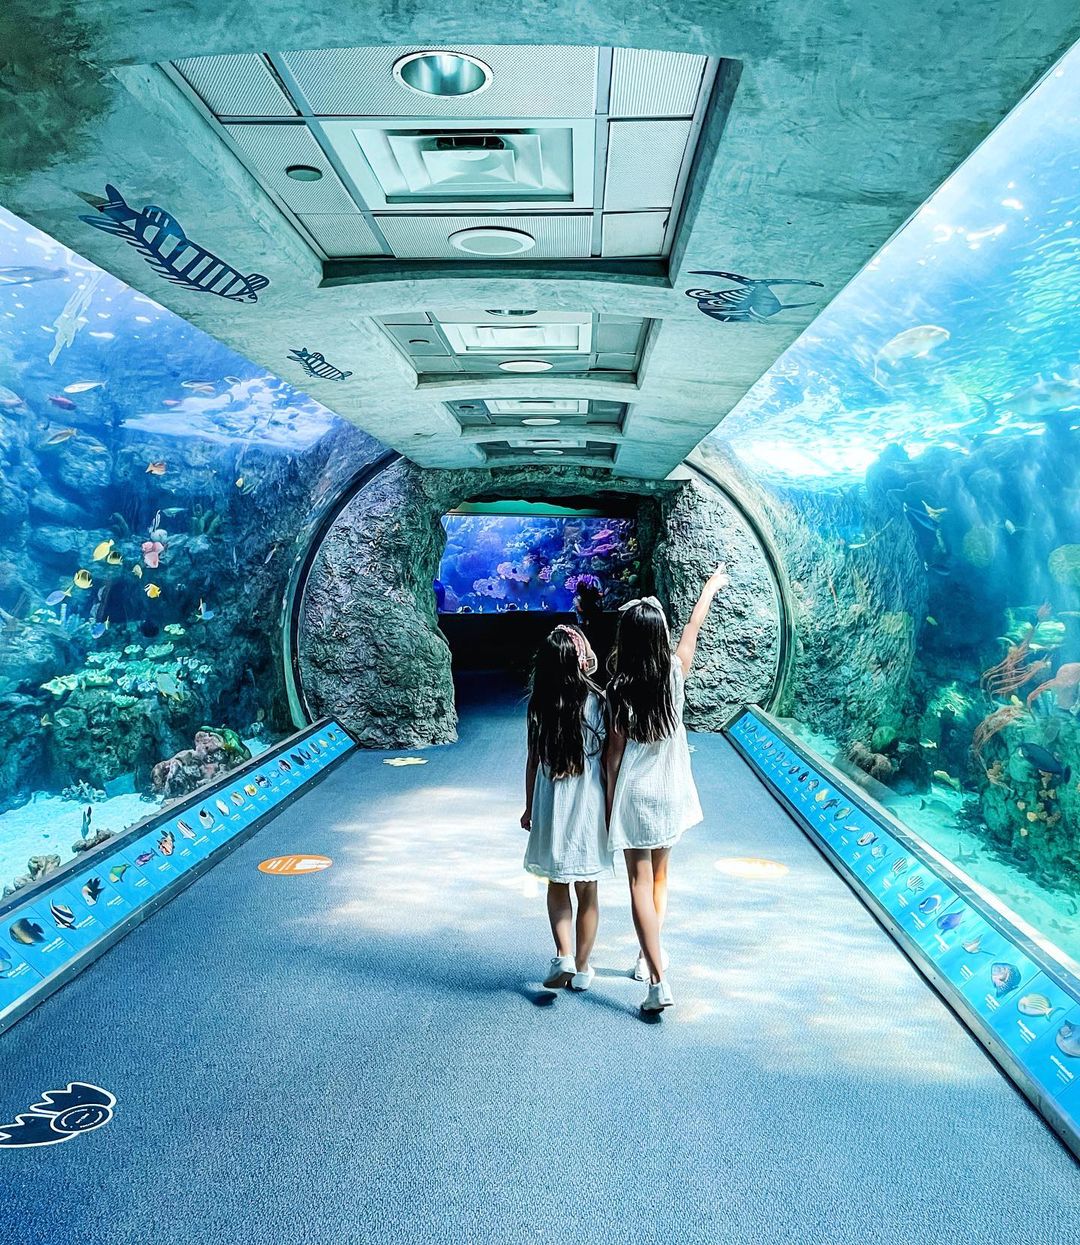 Two young sisters walk through the tunnel of Aquarium of the PAcific in Long Beach, CA. Photo by Instagram user @beachseakers.